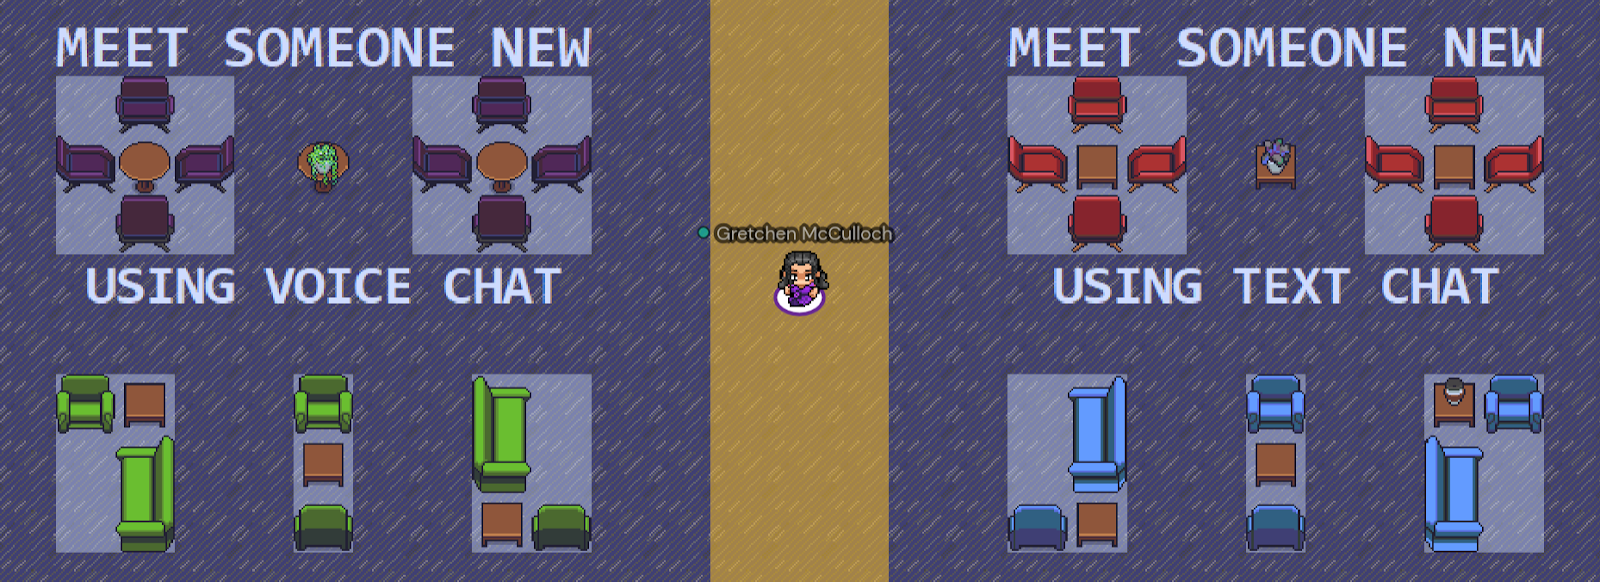 "meet someone new" areas in the LingComm21 Gather space: sets of four chairs arranged around small tables, surrounded by text reading "meet someone new using voice chat" or "meet someone new using text chat"